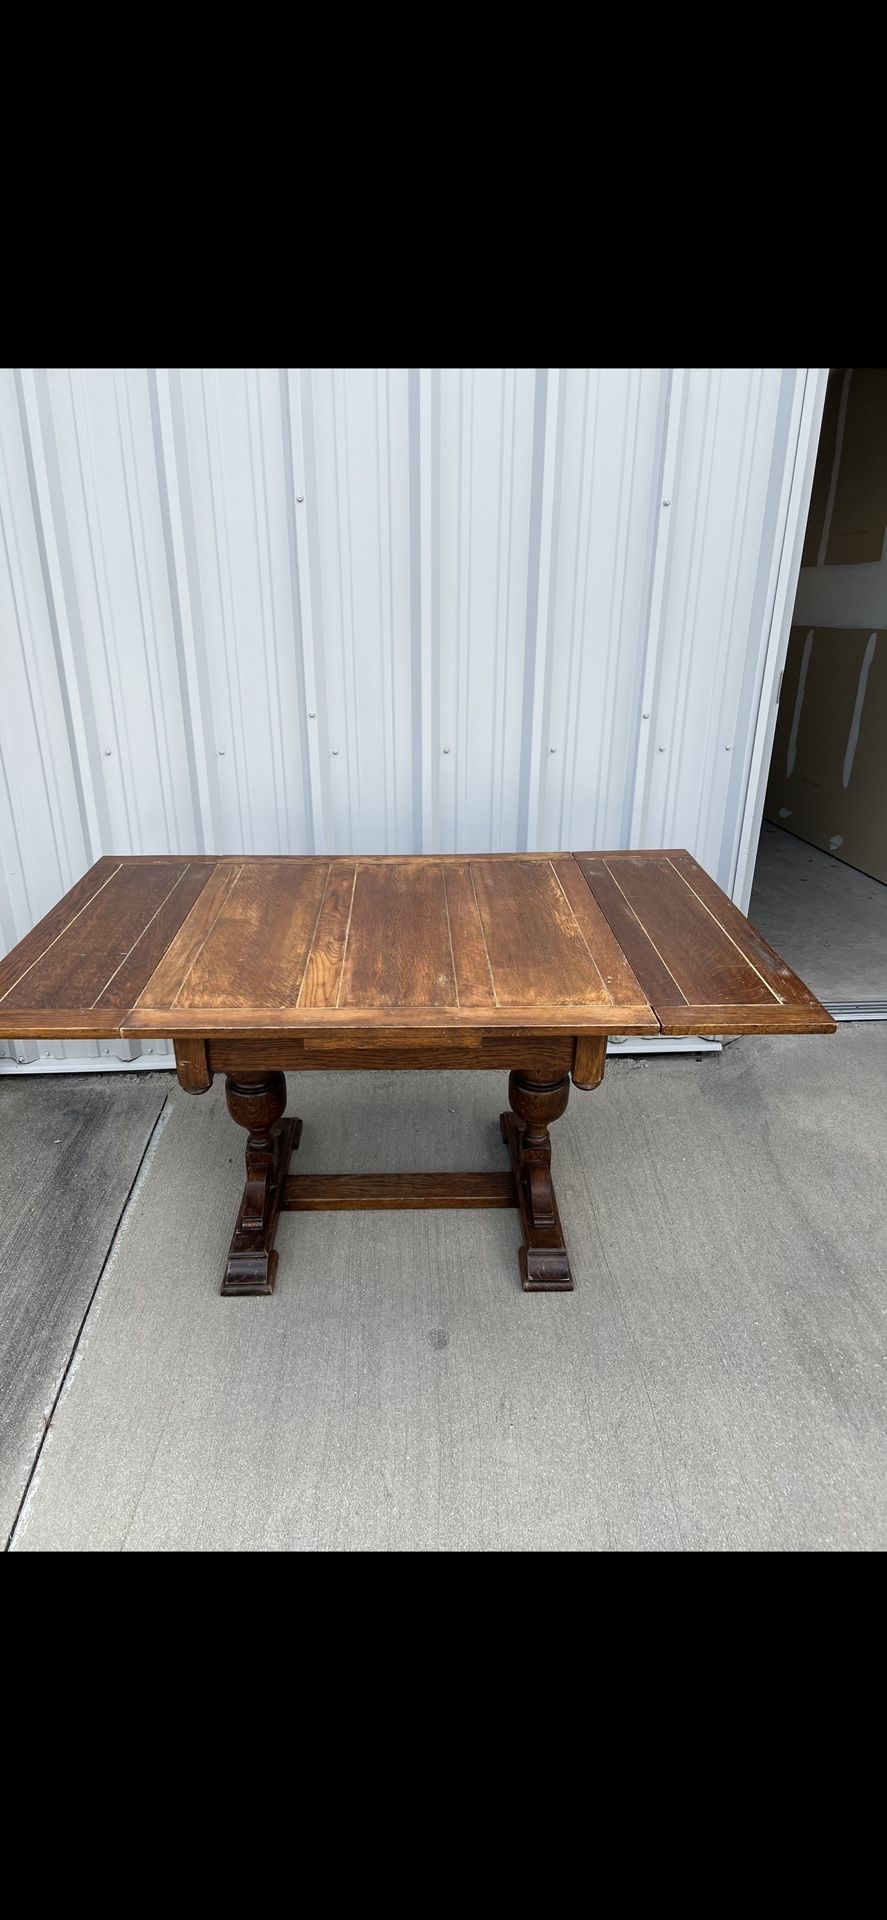 Wooden Pub/dining Table